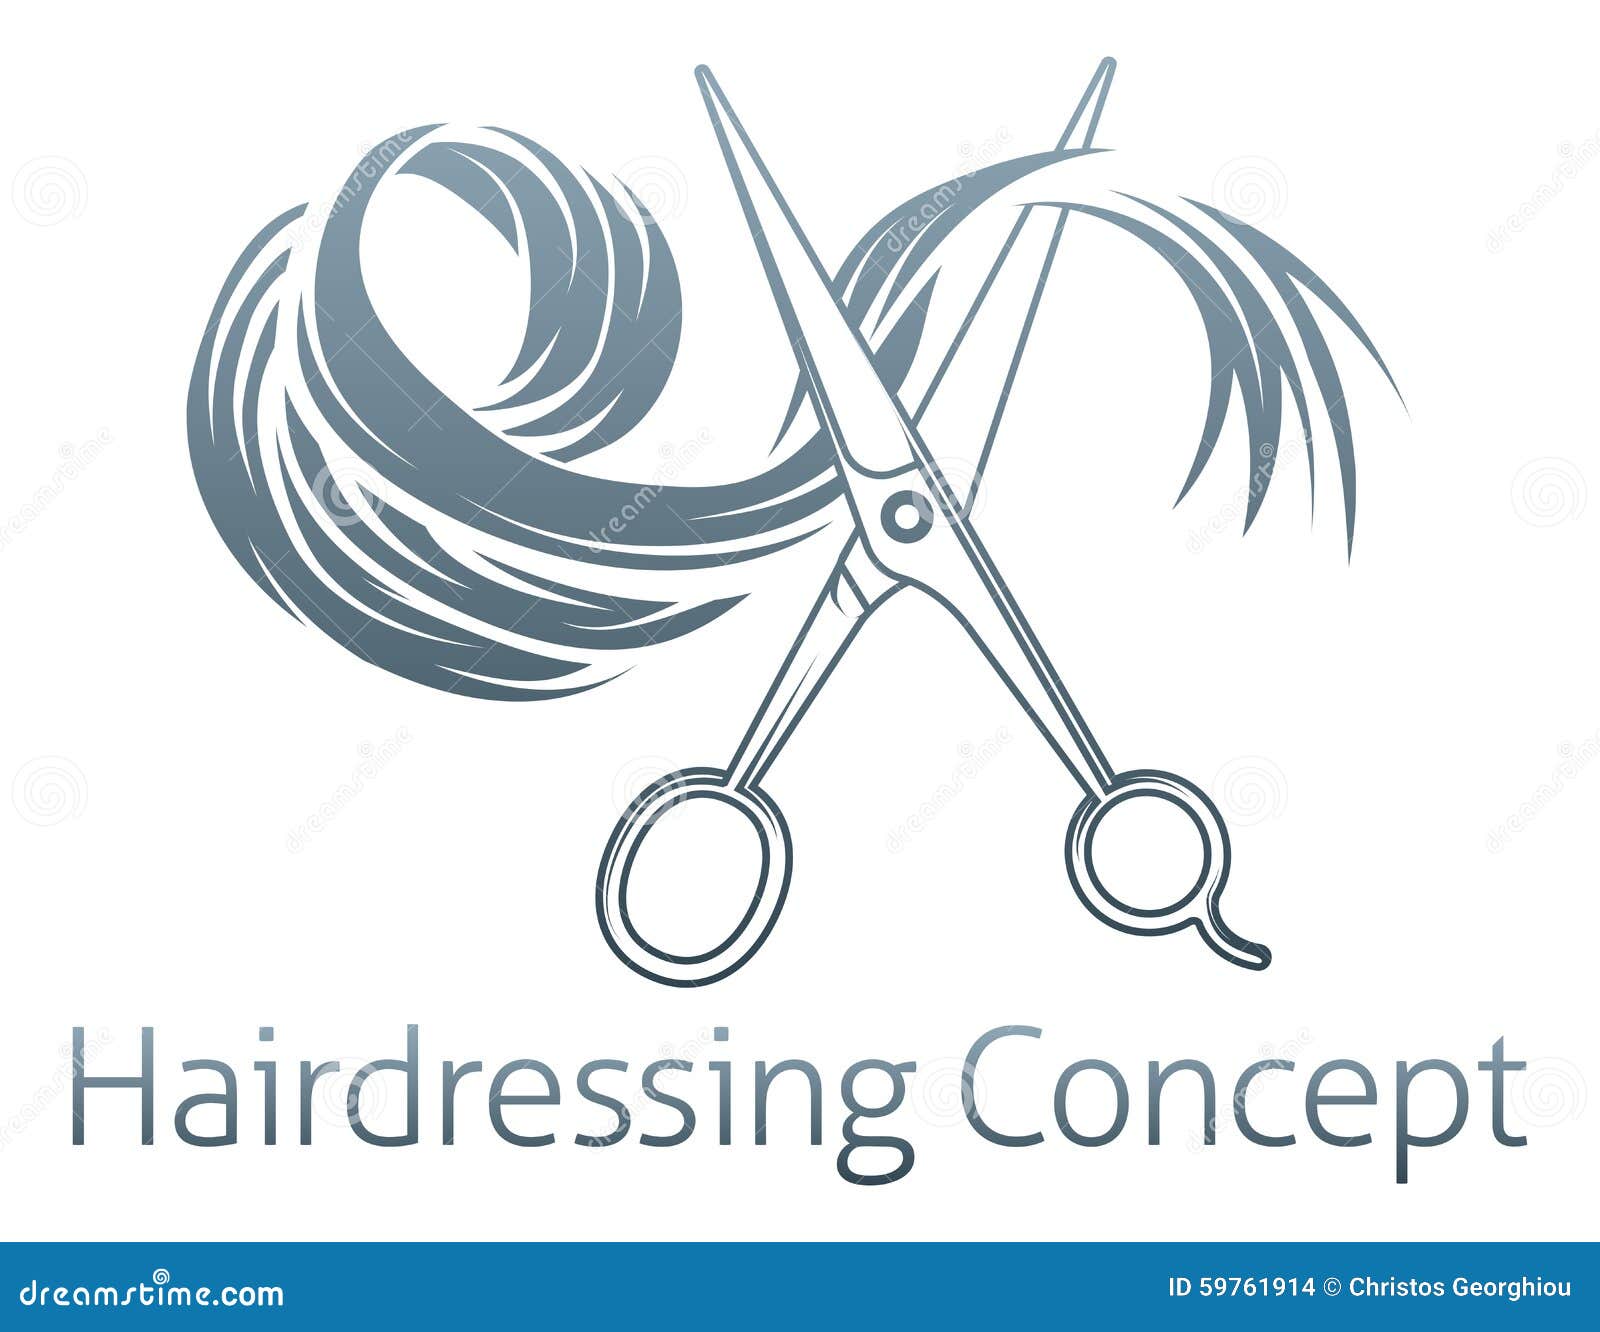 Hairdressing Concept Stock Vector - Image: 59761914